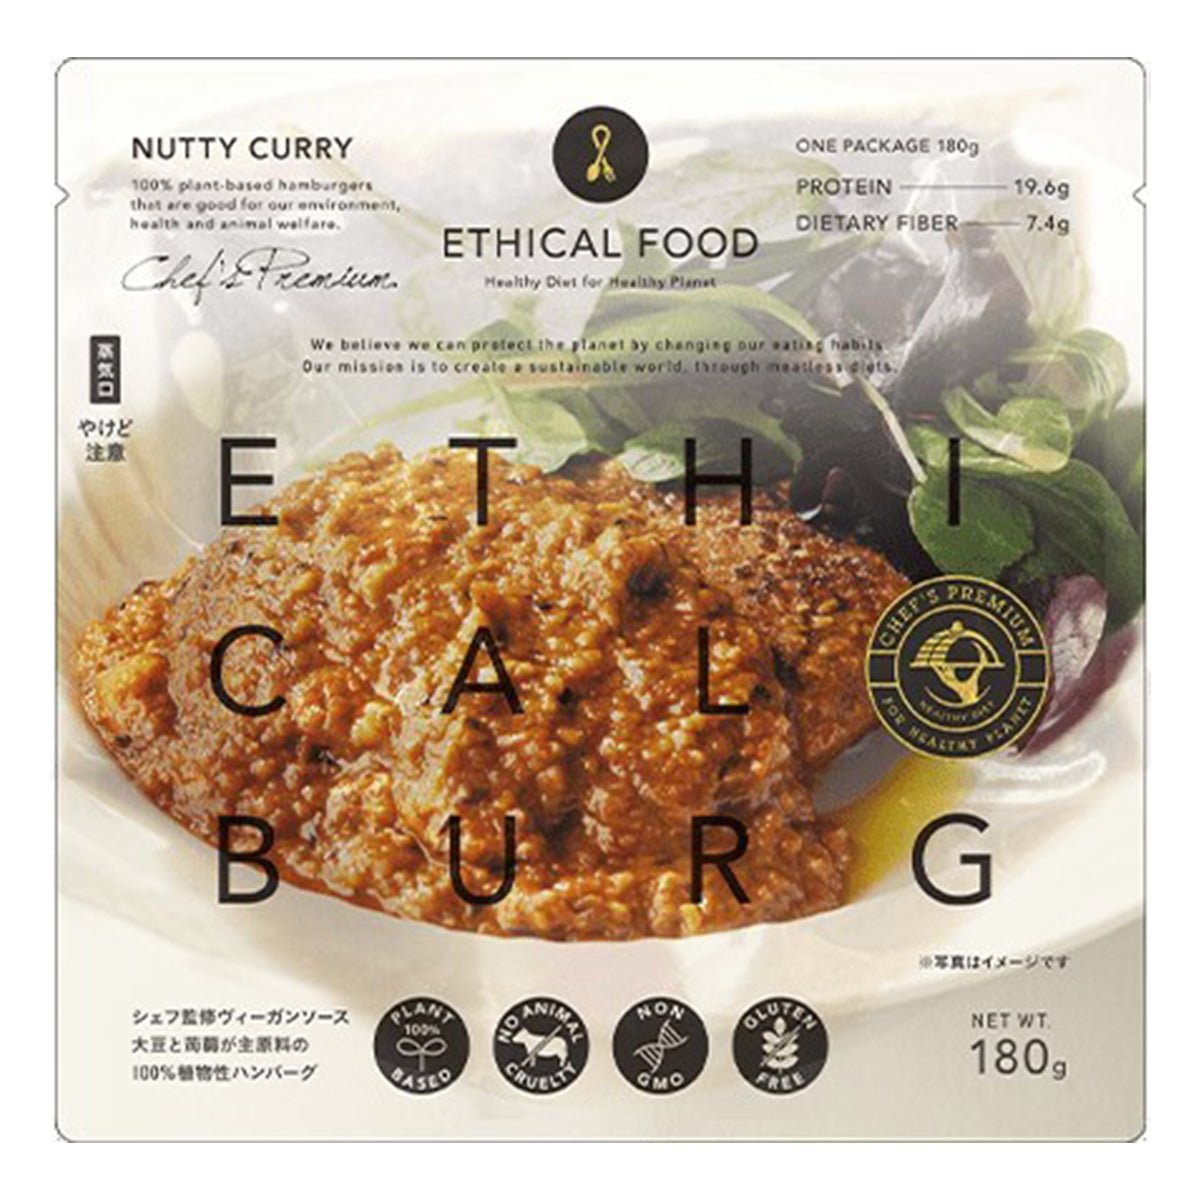 Ethical ETHICAL Plant based Meatloaf Nutty Curry CHEF'S PREMIUM - Tokyo Fresh Direct